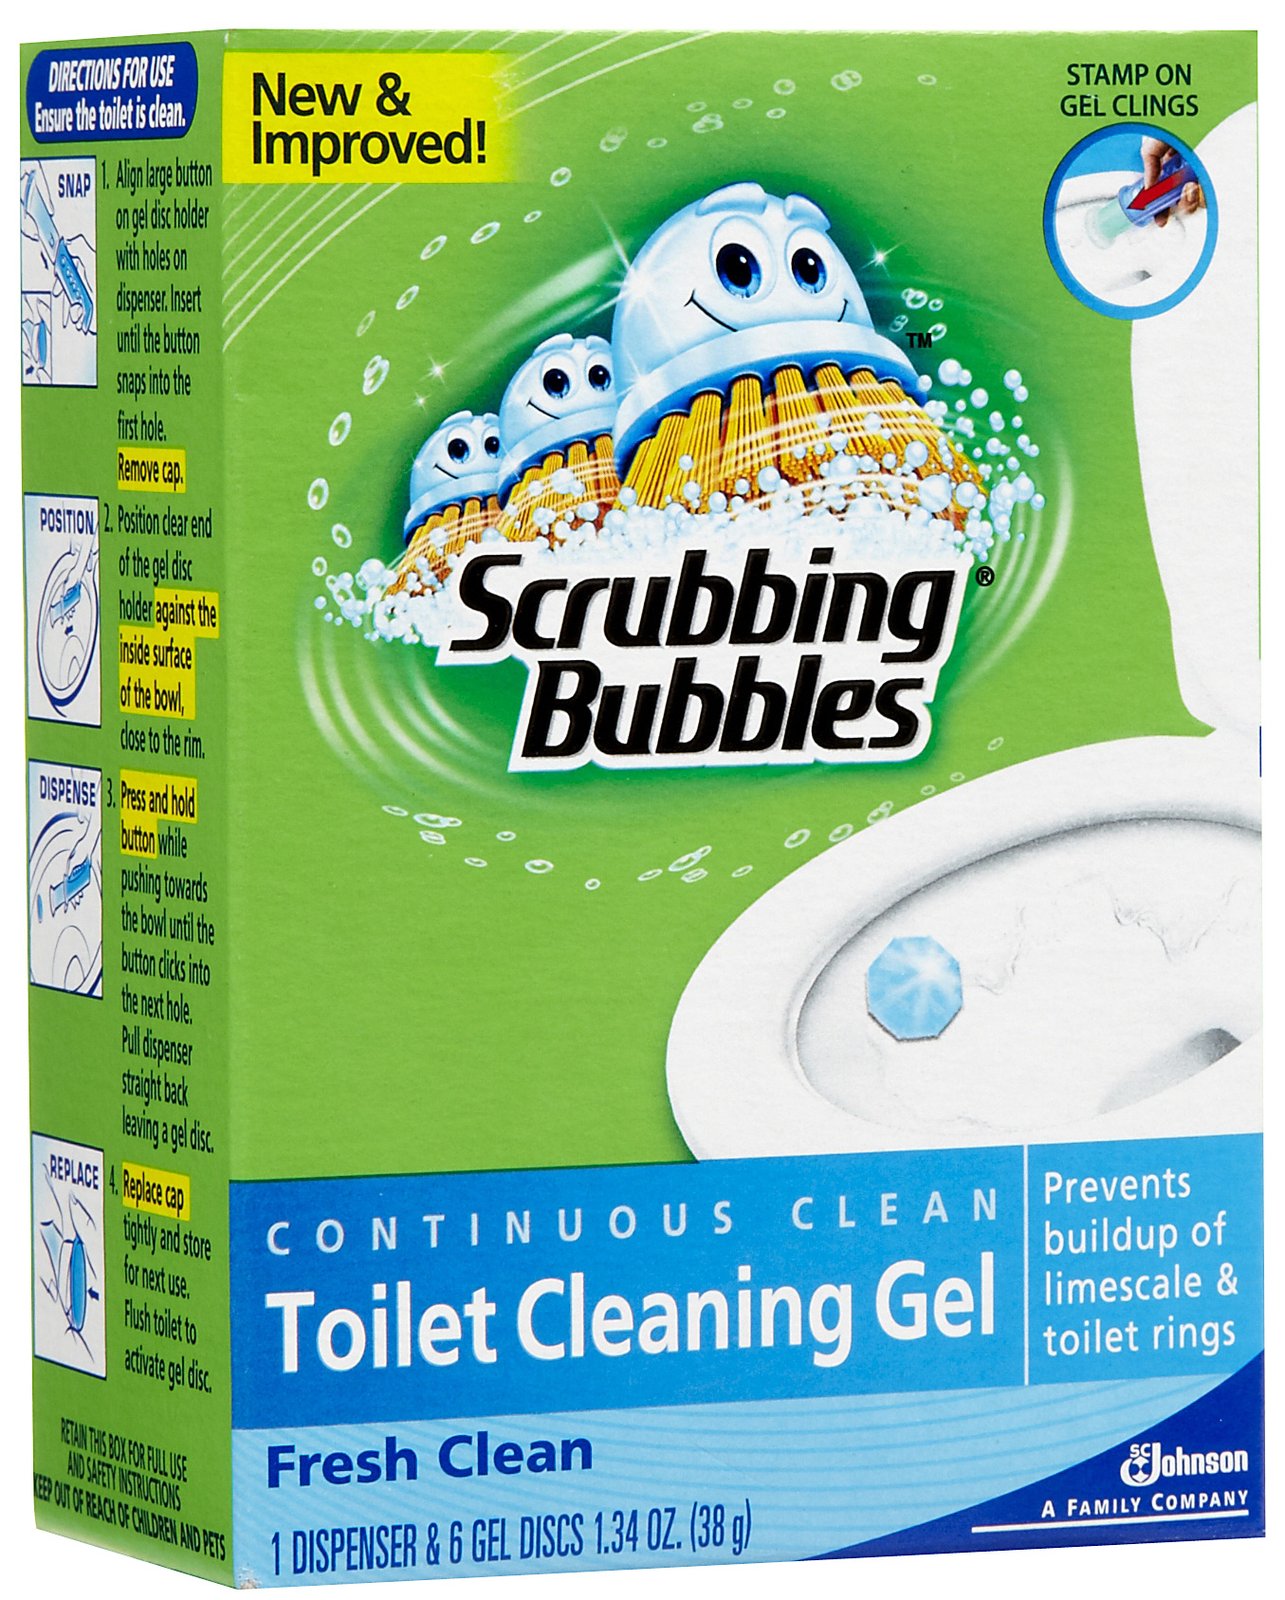 kouponing-kristyn-free-scrubbing-bubbles-starter-kits-after-coupon-and